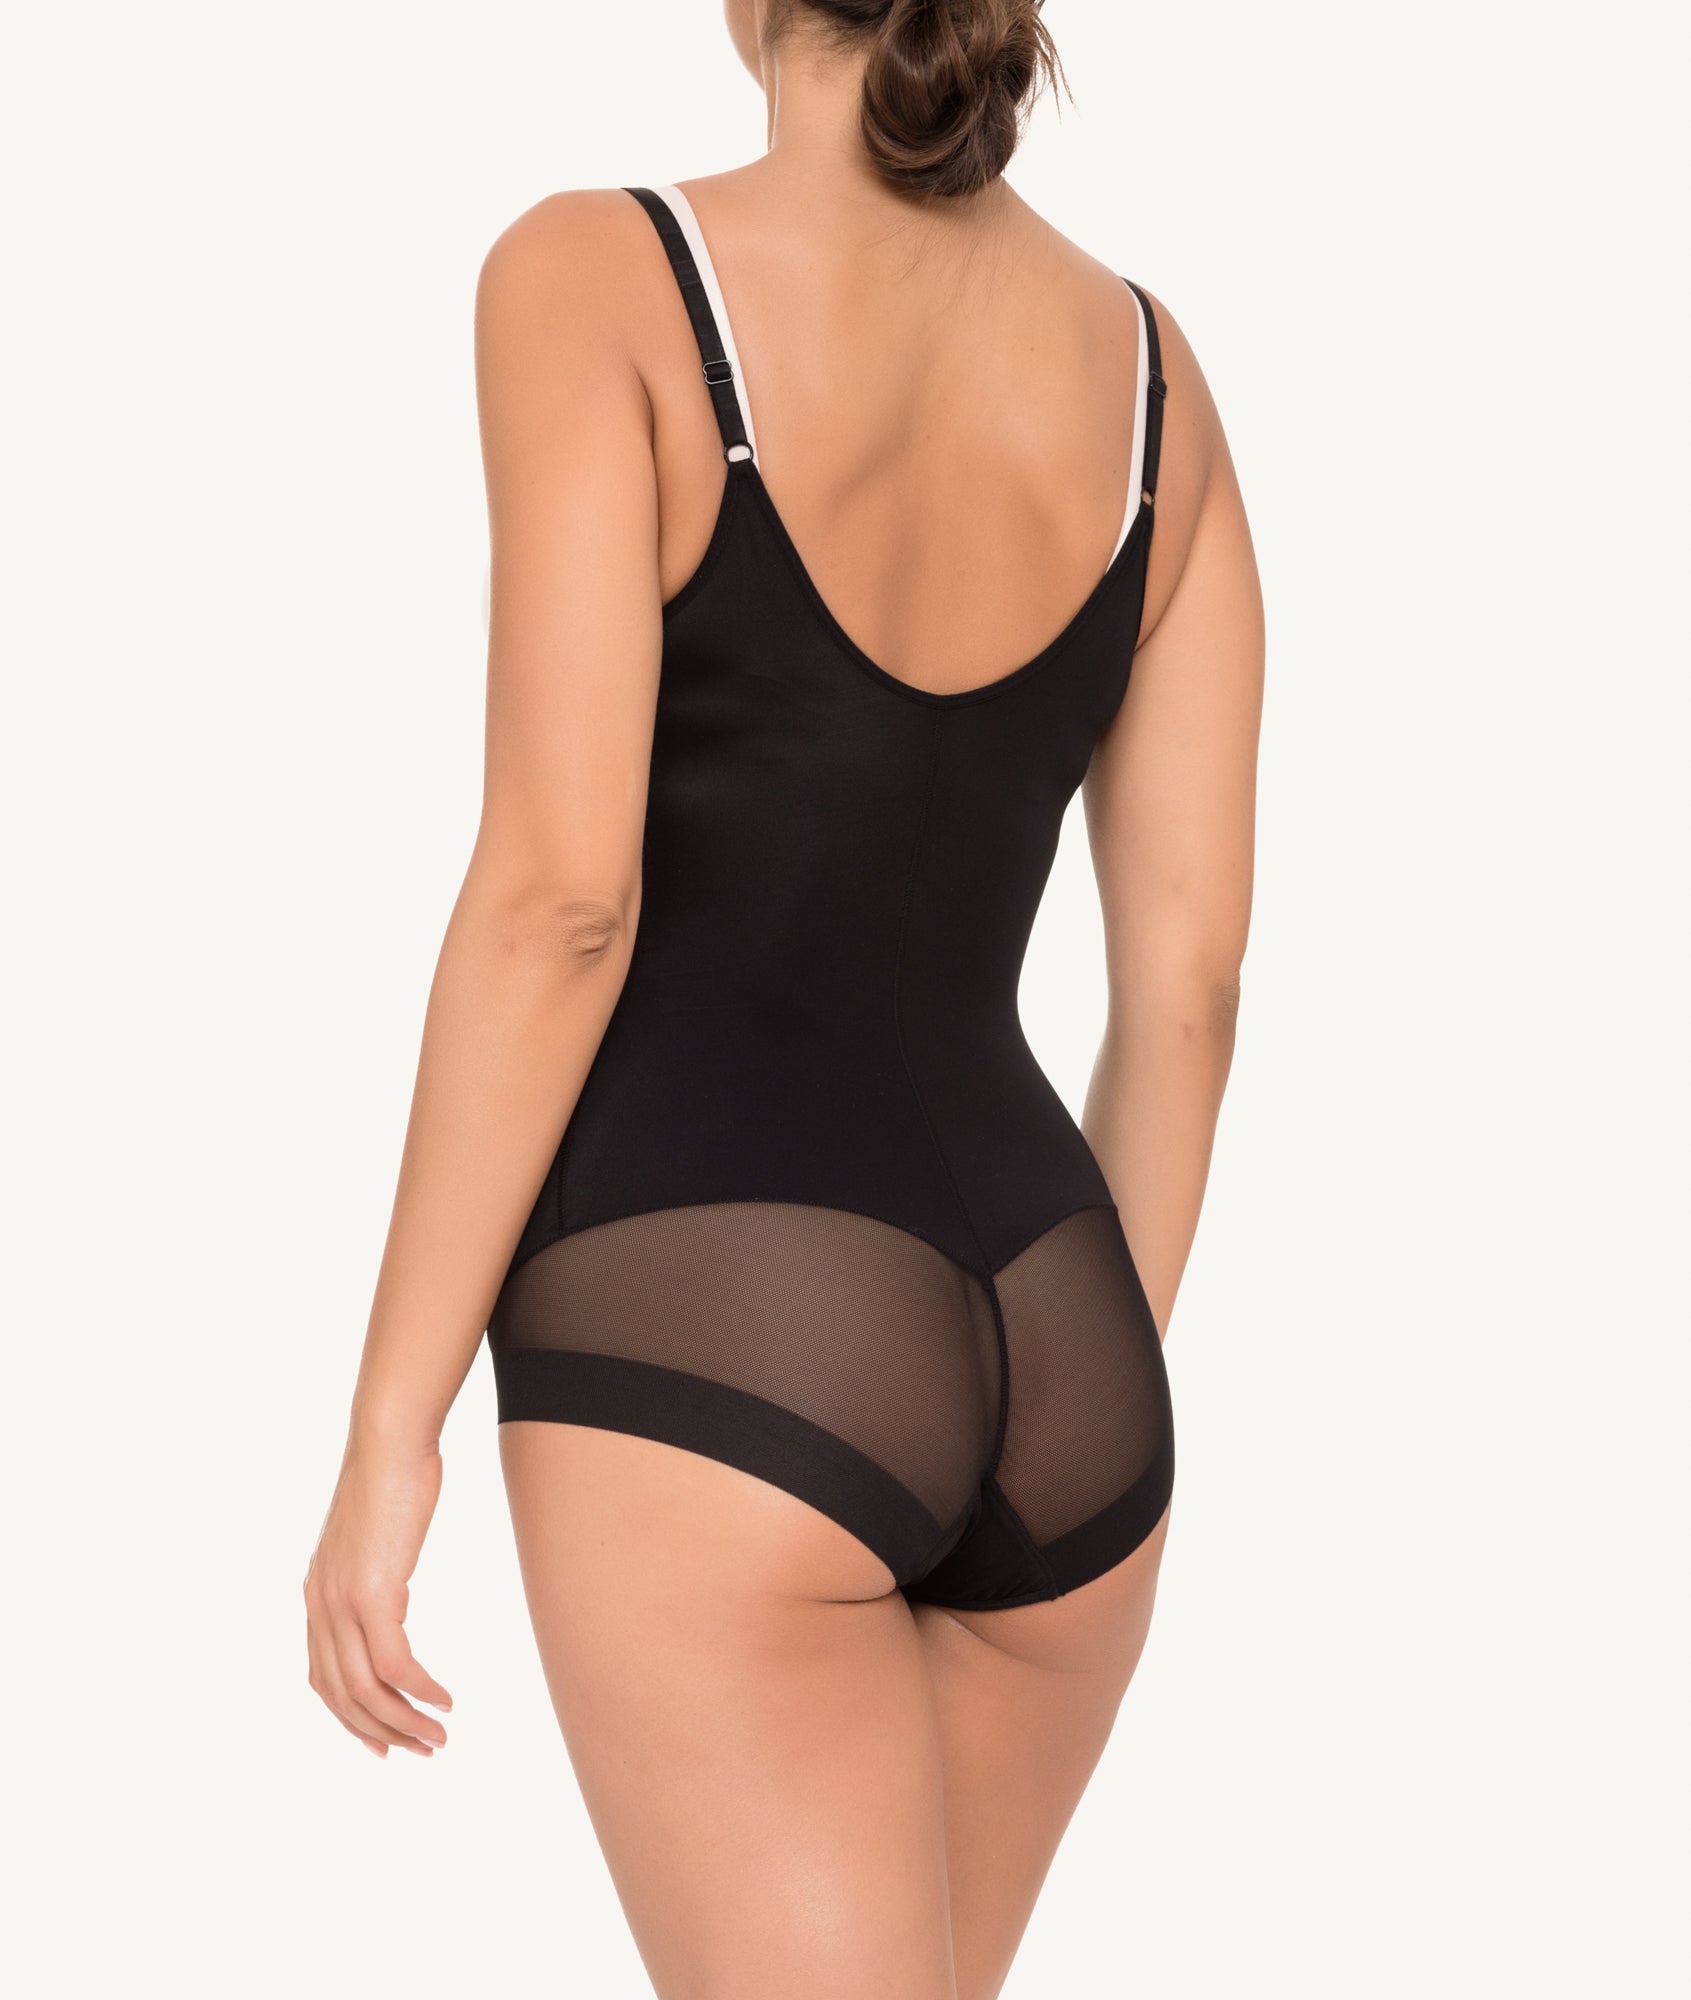 Body reductor-CHANNO Woman – Channo